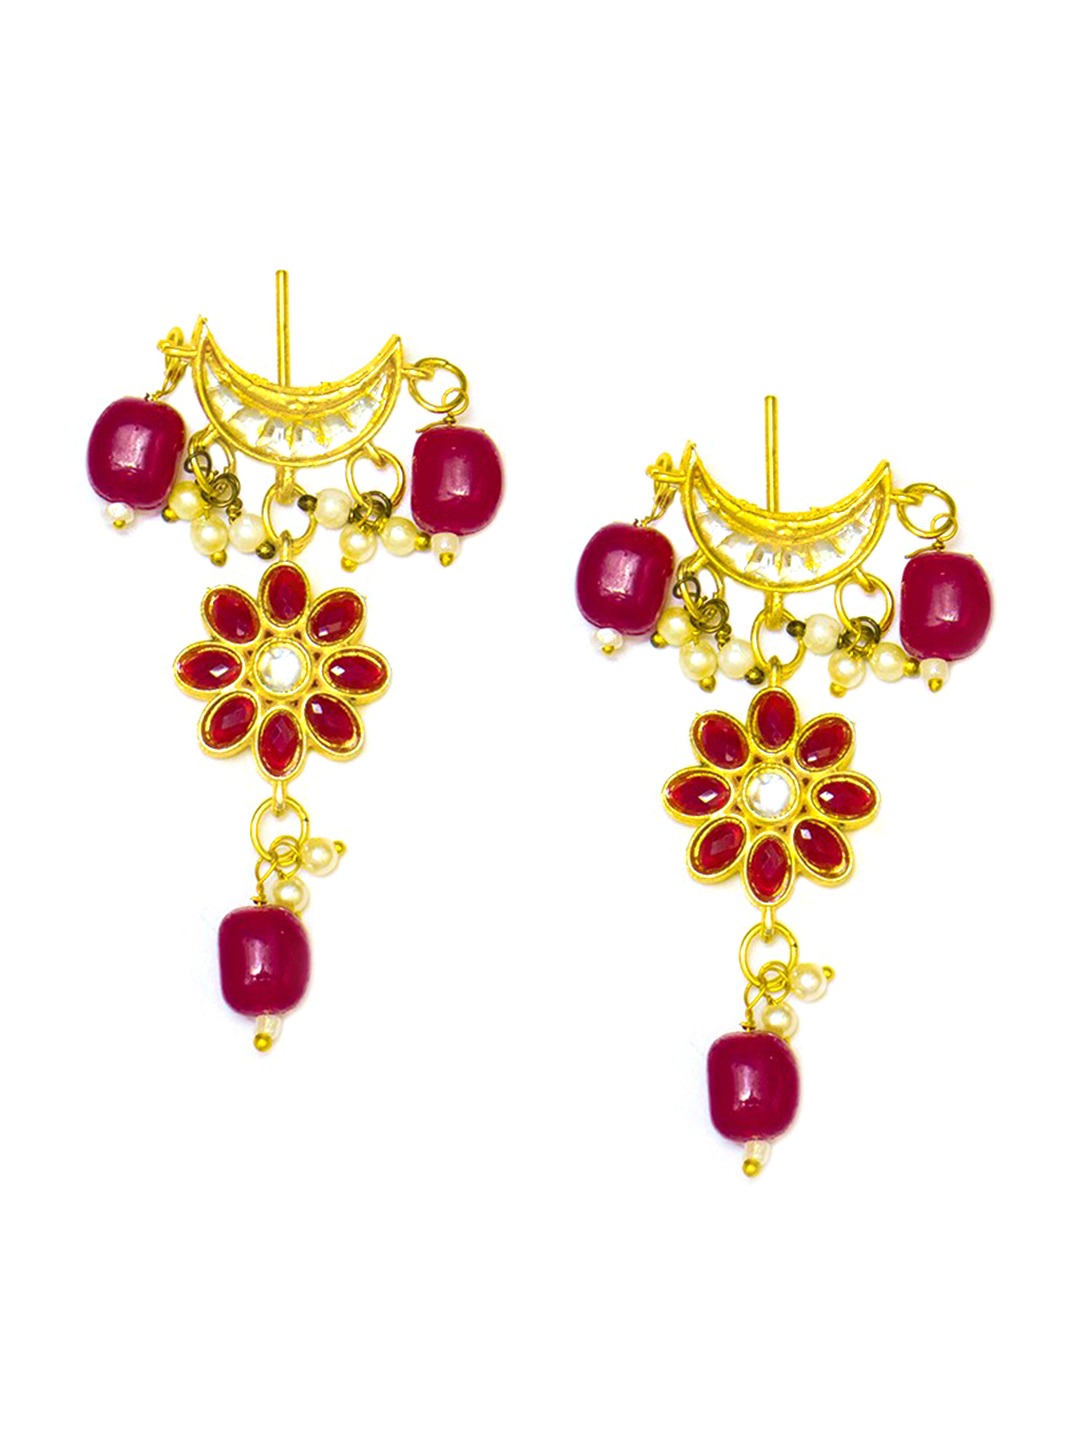 Women's Pink & White Gold-Plated Stone-Studded & Beaded Jewellery Set - Morkanth